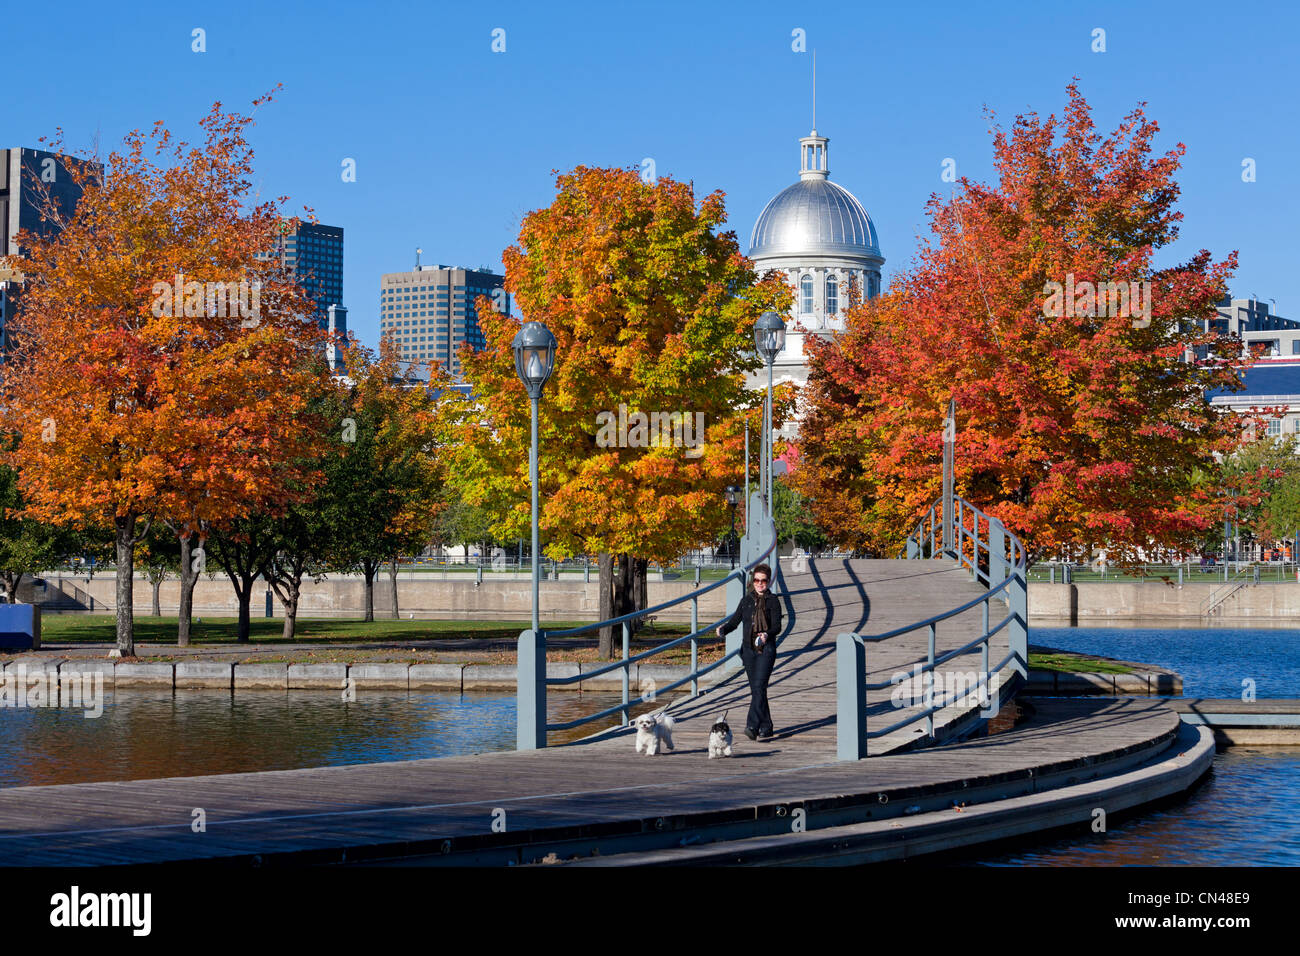 Canada, Quebec Province, Montreal, Old Montreal, Old Port, Notre Dame de Bonsecours Chapel, the colors of Autumn, woman walking Stock Photo